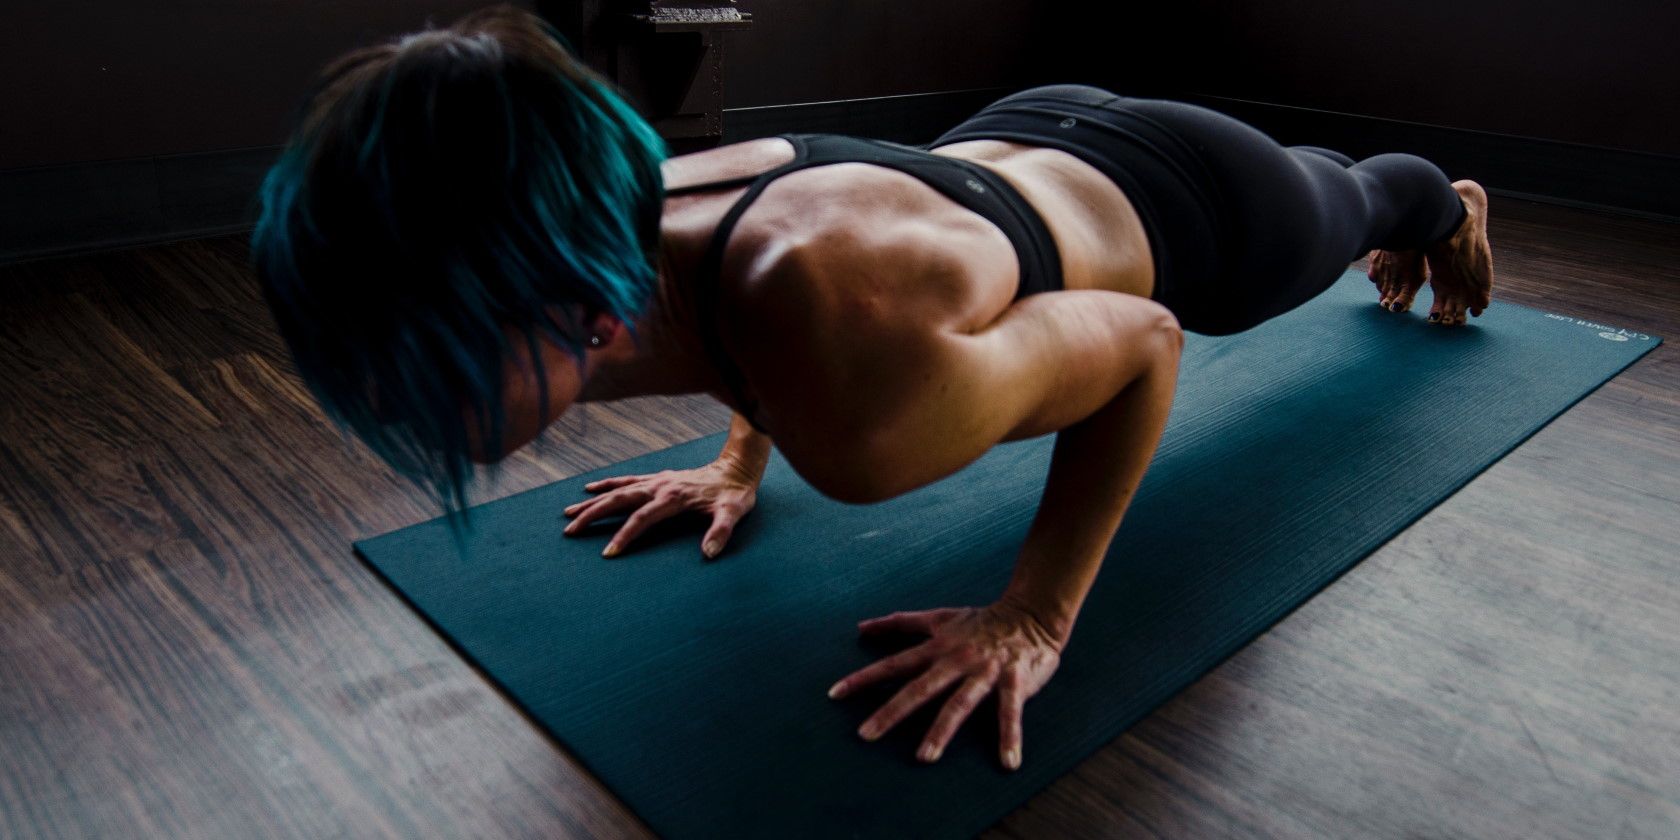 Woman leaning on exercise mat and doing push ups